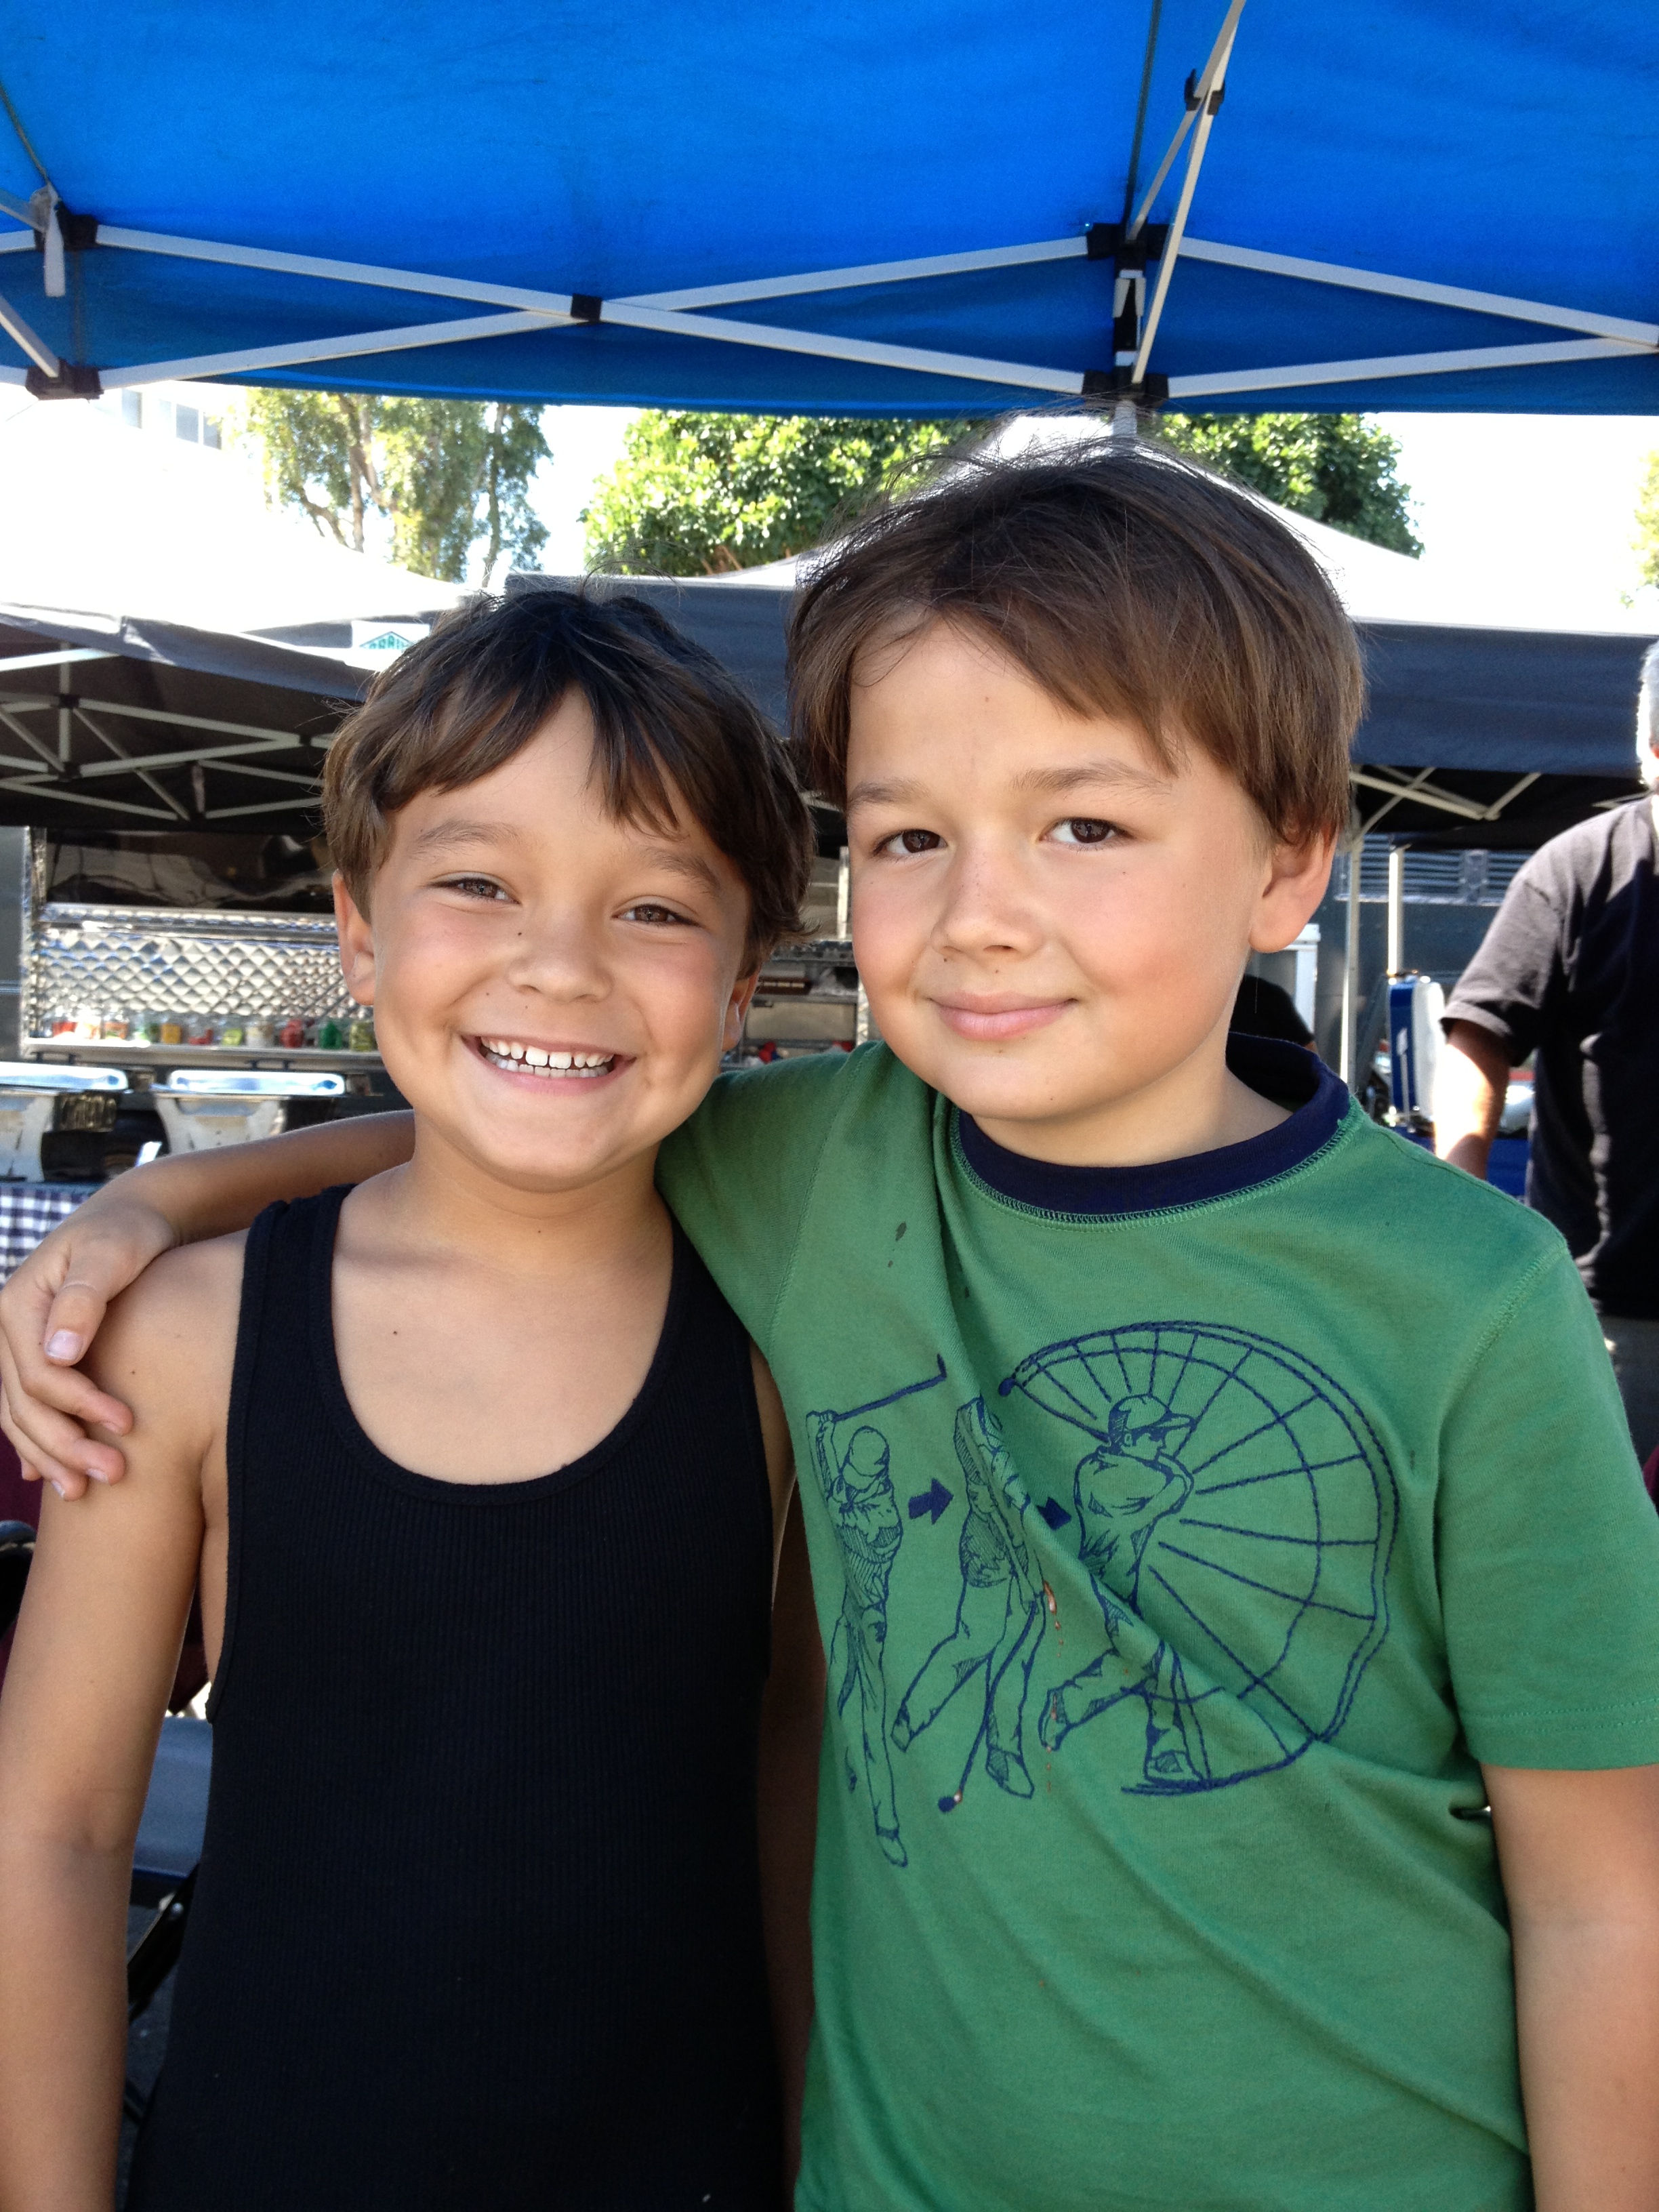 Anthony with Pierce Gagnon on the set.